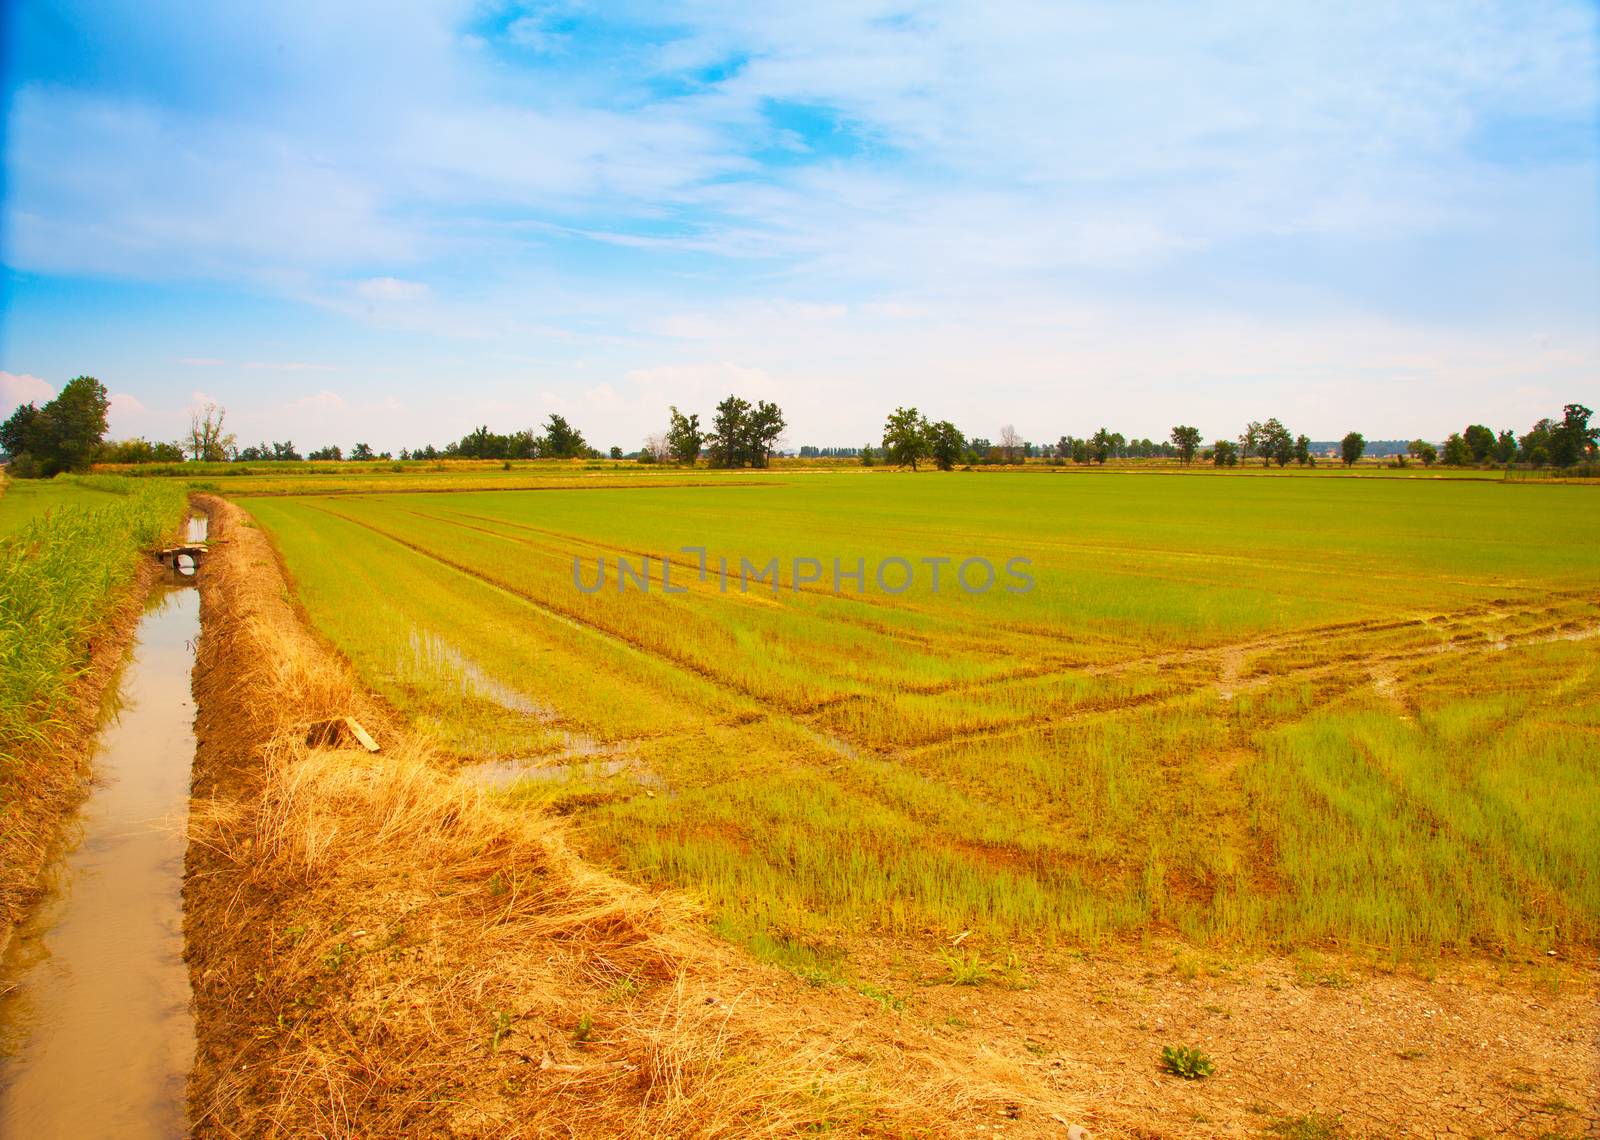 Panorama of a rice field under the blue sky